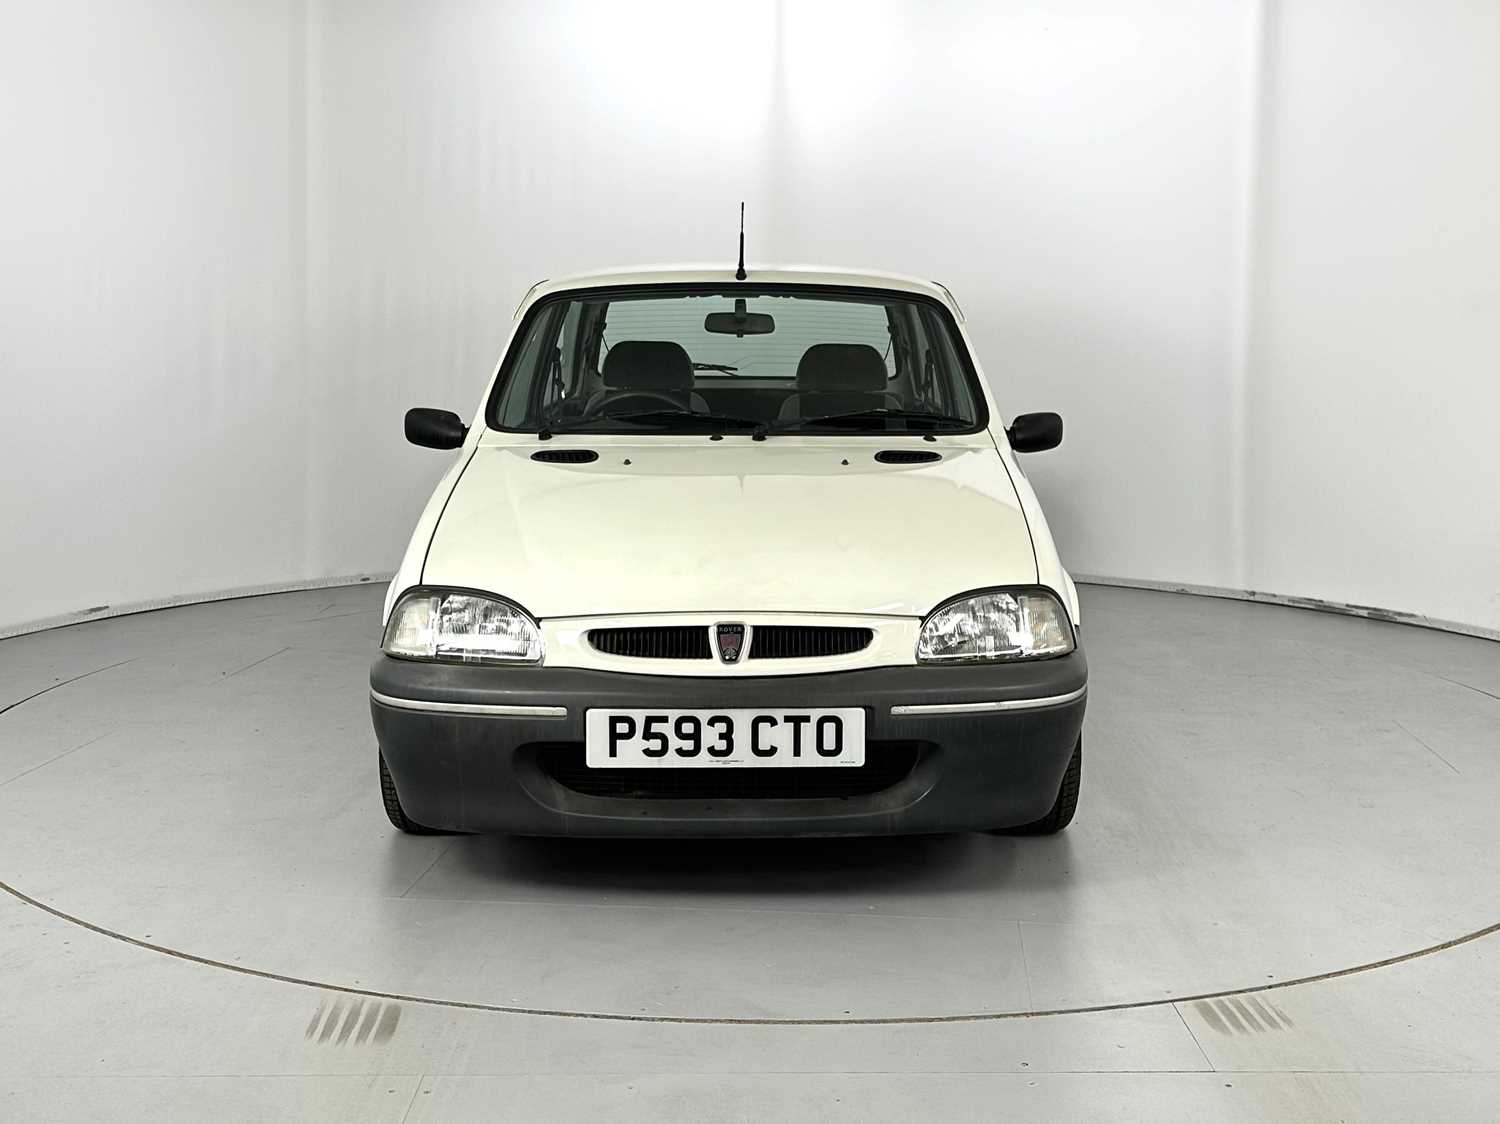 1996 Rover Metro - NO RESERVE 13,000 miles! - Image 2 of 29